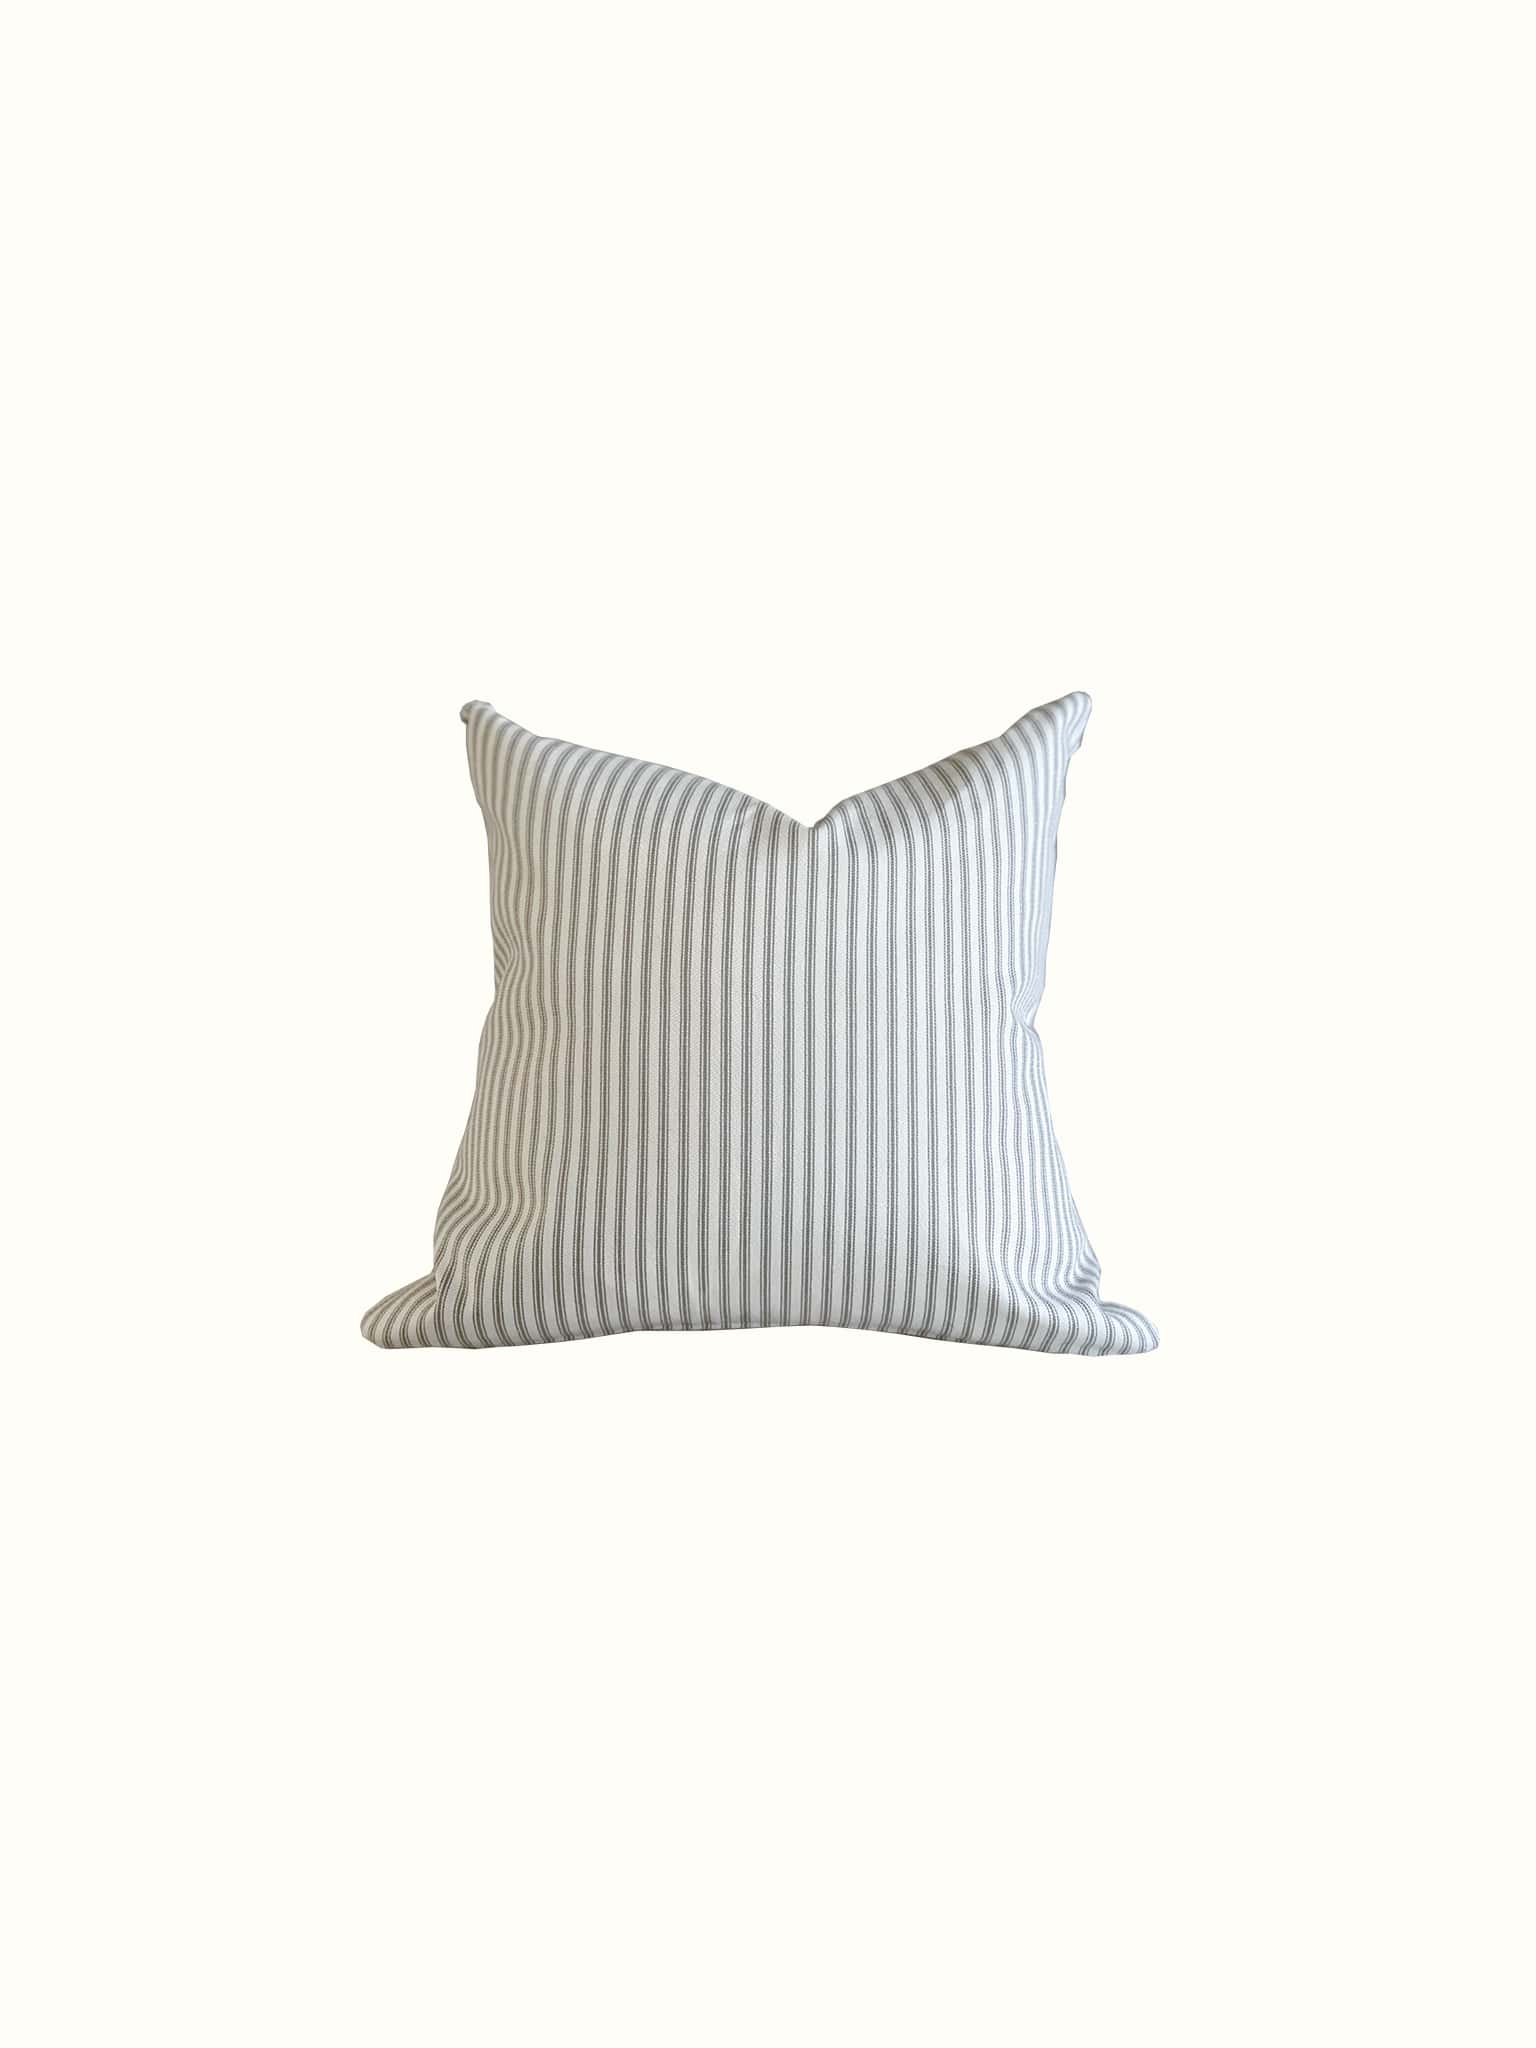 Cream beige pillow cover in classic ticking stripes at Cielle Home